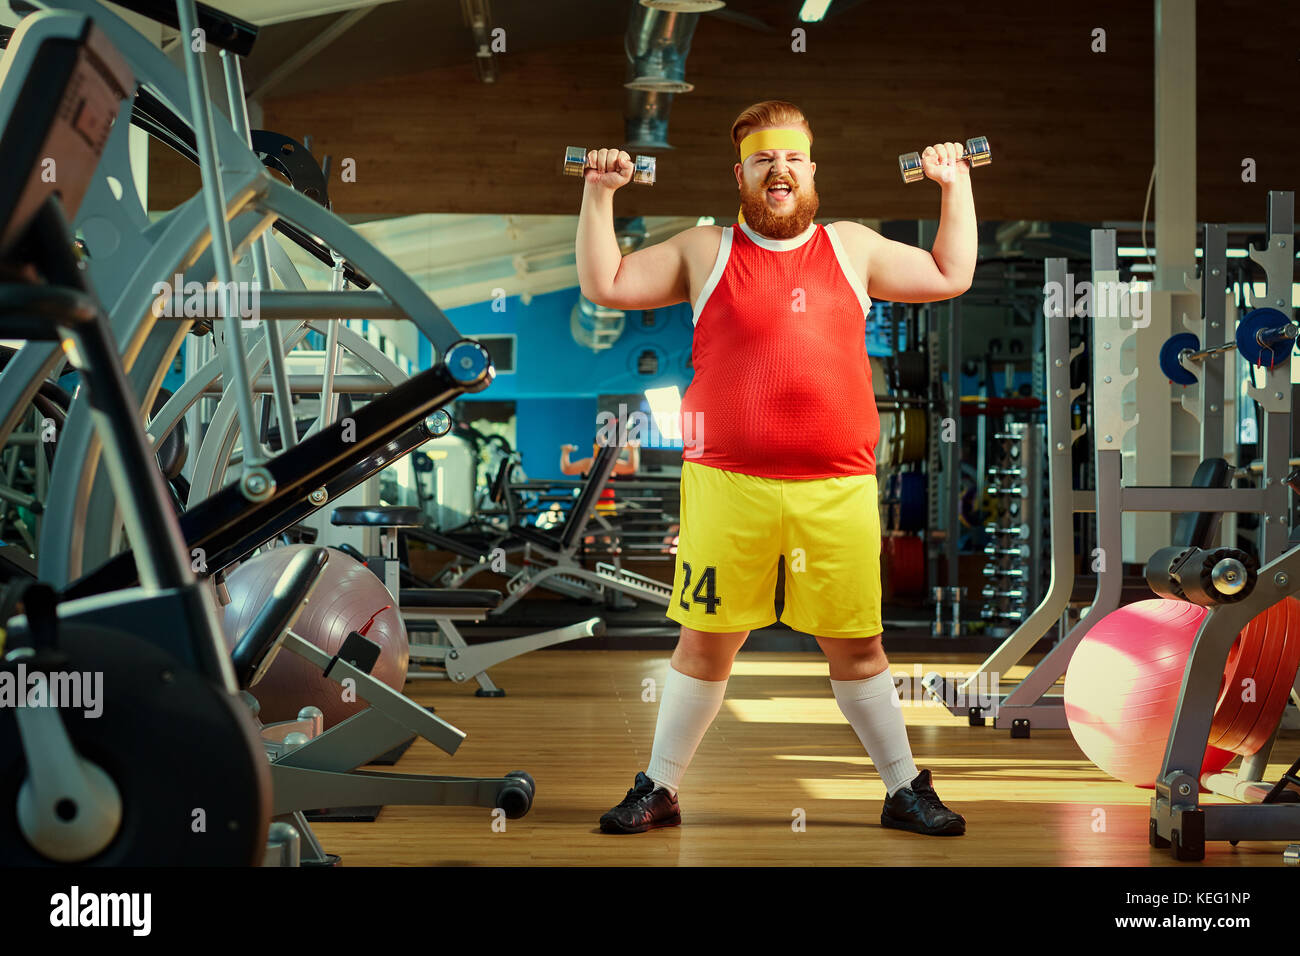 Fat funny man in the gym. Stock Photo